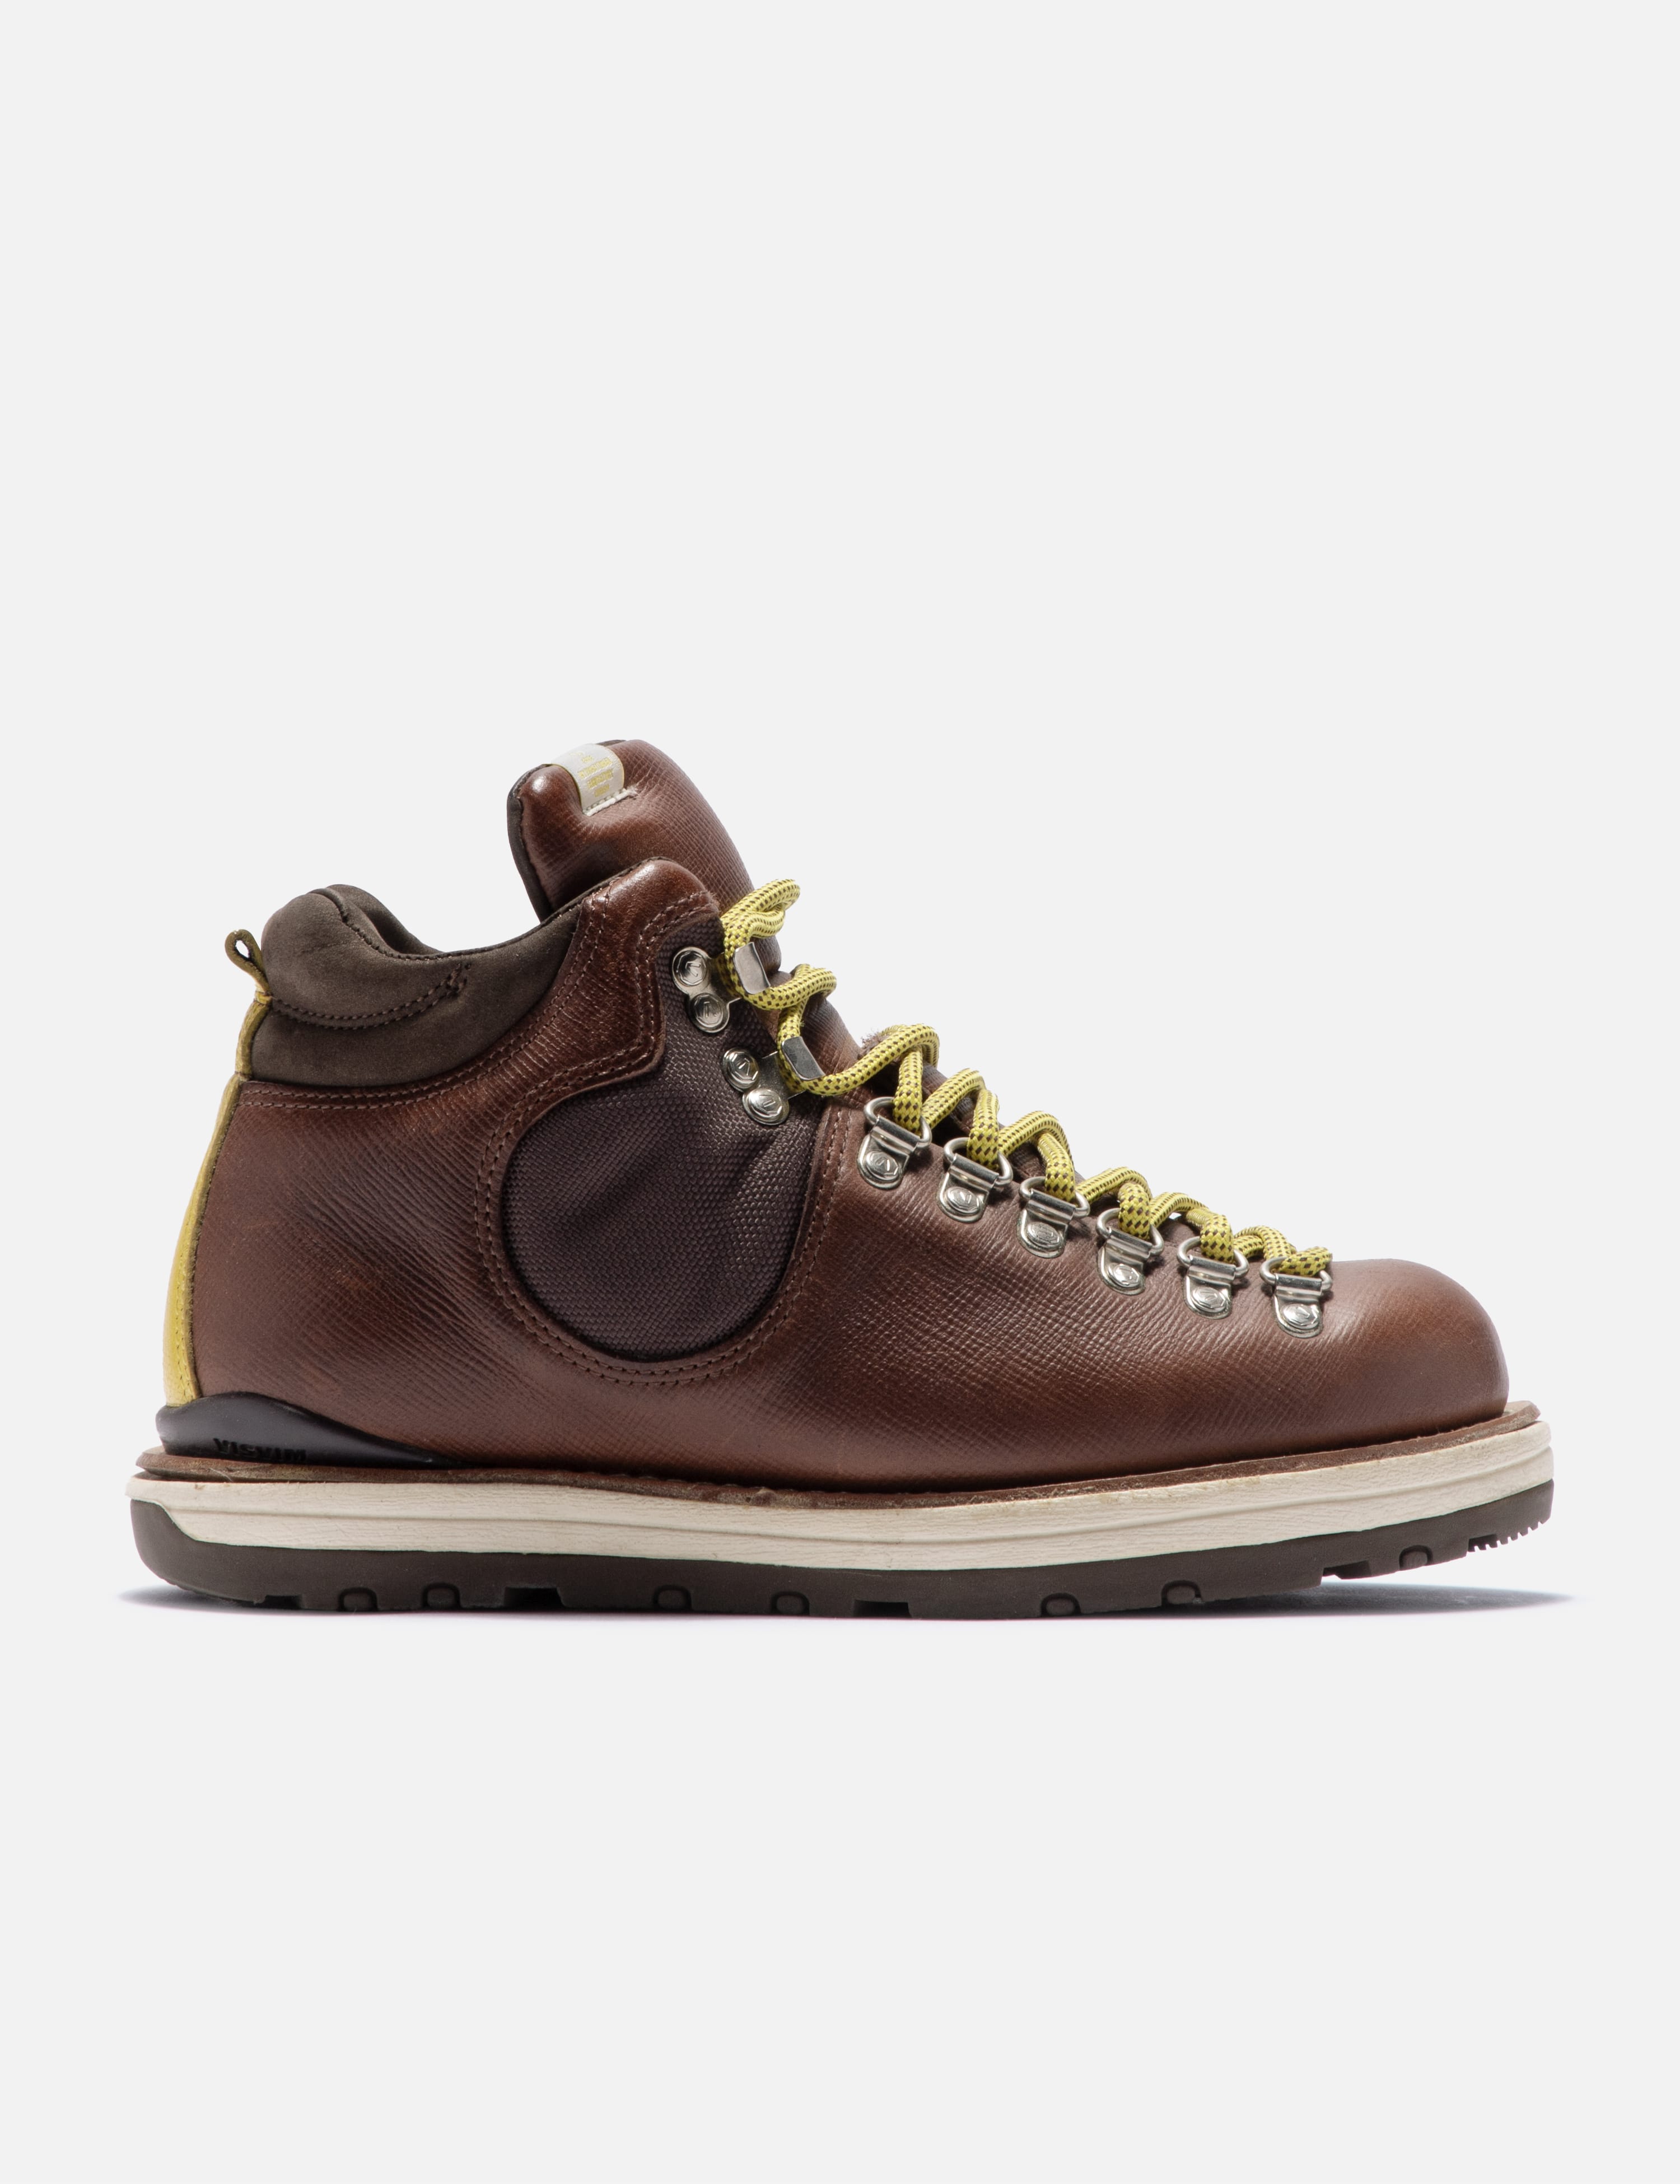 Pre-owned Visvim | HBX - Globally Curated Fashion and Lifestyle by